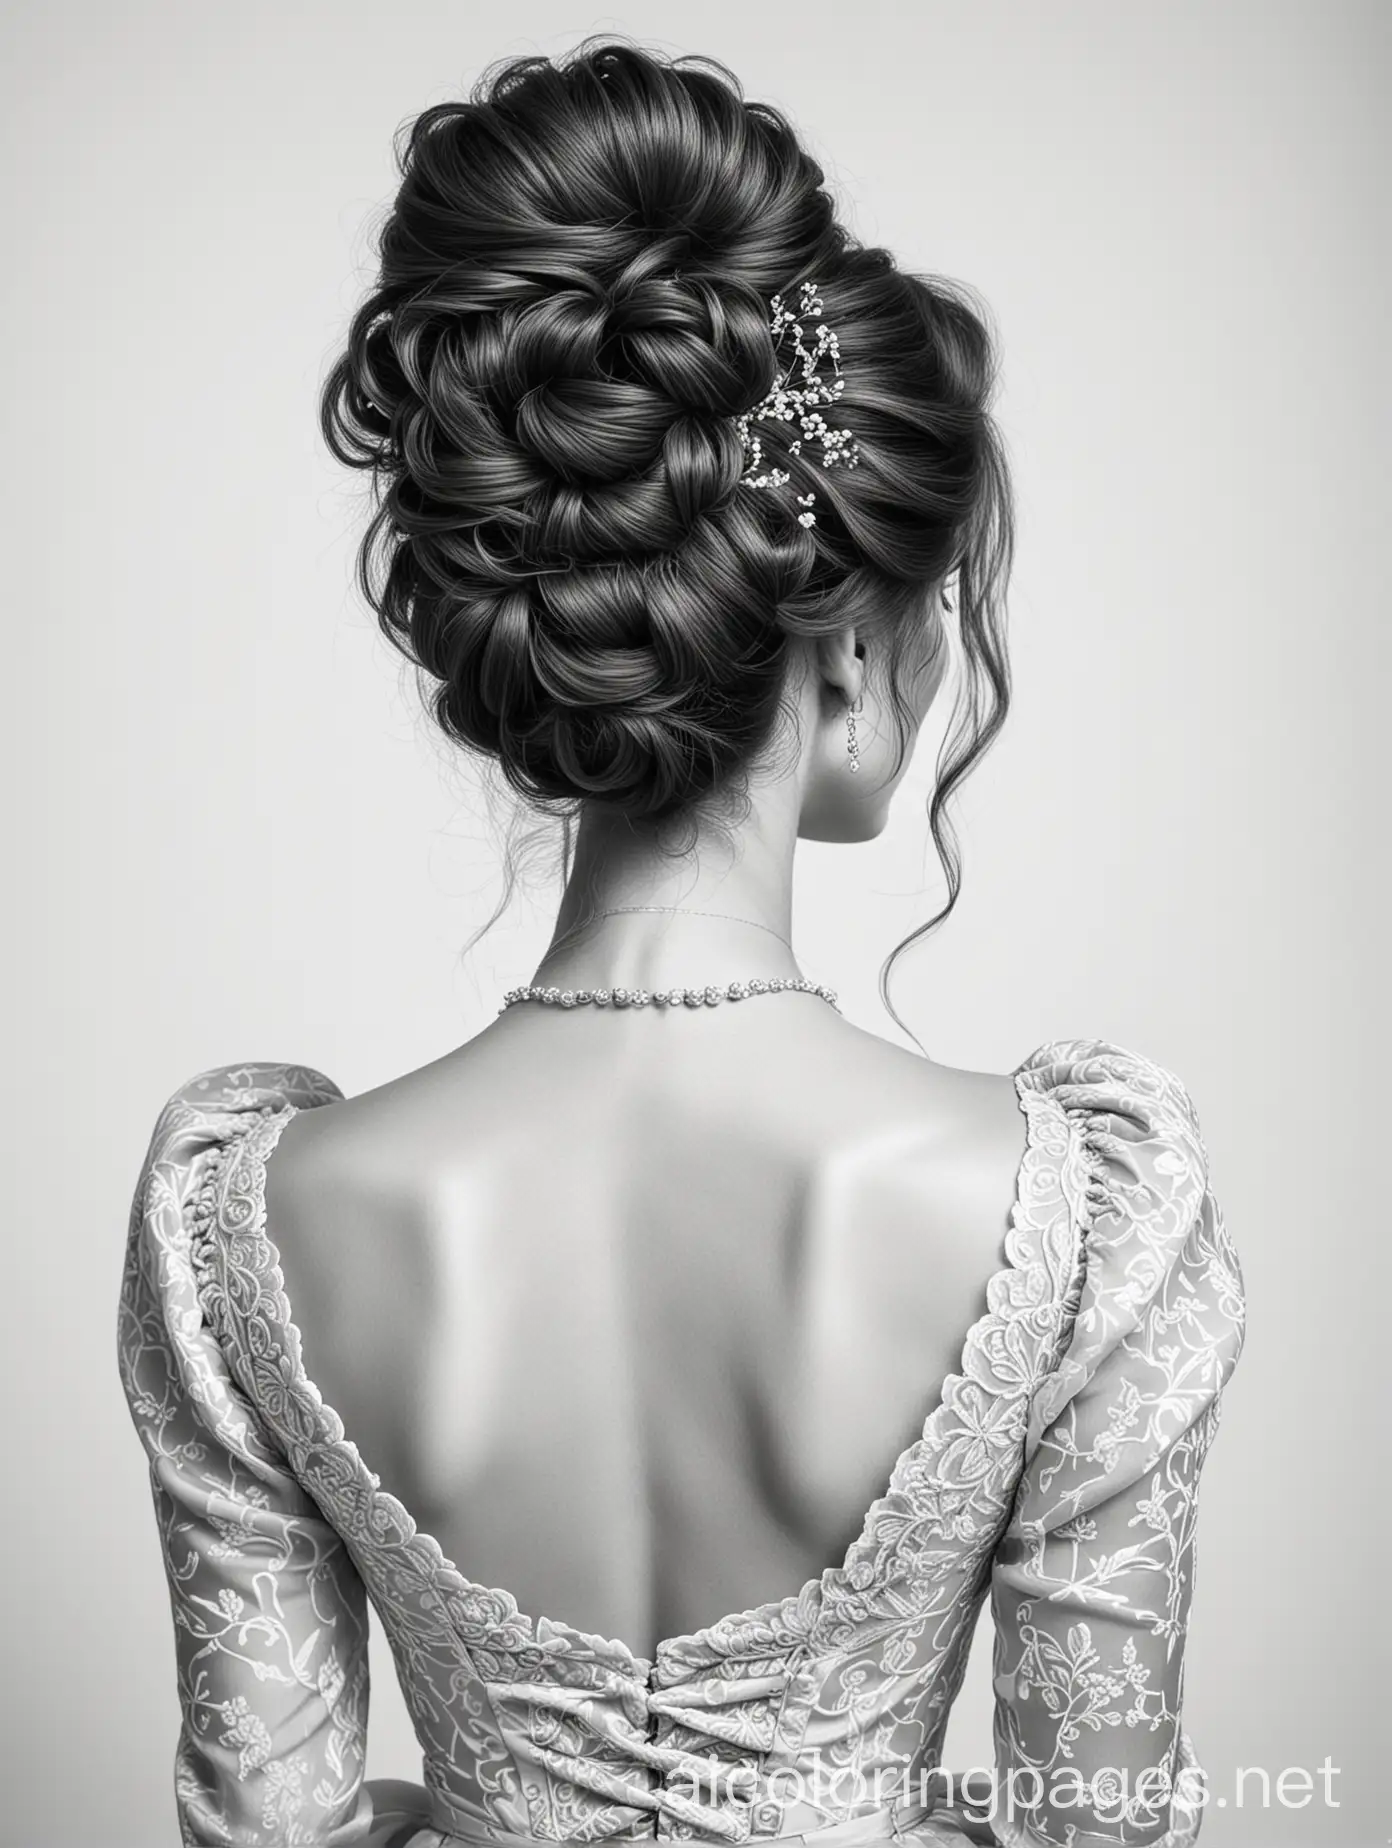 portrait of a woman from behind with a fancy Bridgerton updo and a fancy dress, Coloring Page, black and white, line art, white background, Simplicity, Ample White Space. The background of the coloring page is plain white to make it easy for young children to color within the lines. The outlines of all the subjects are easy to distinguish, making it simple for kids to color without too much difficulty